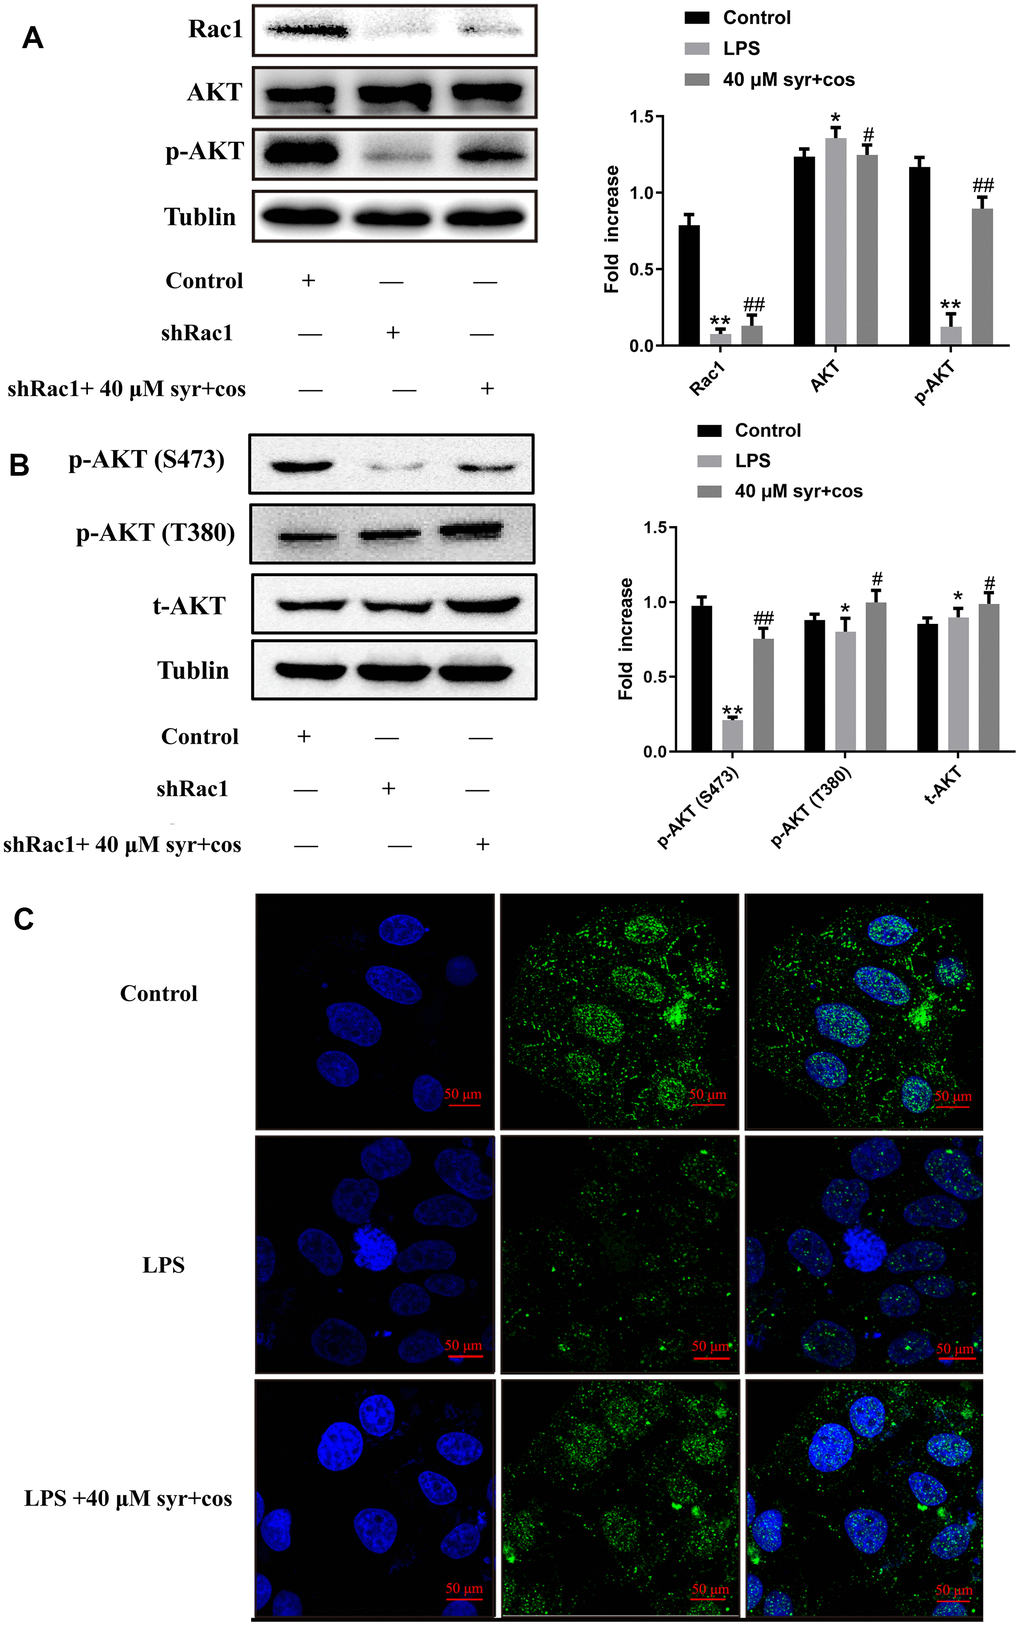 (A) The expression of Rac1, AKT, p-AKT proteins respectively. (B) The expression of IKK α/β and IκB, p-IκB proteins respectively. (C) The BrdU immunofluorescence results of p-AKT (100×).